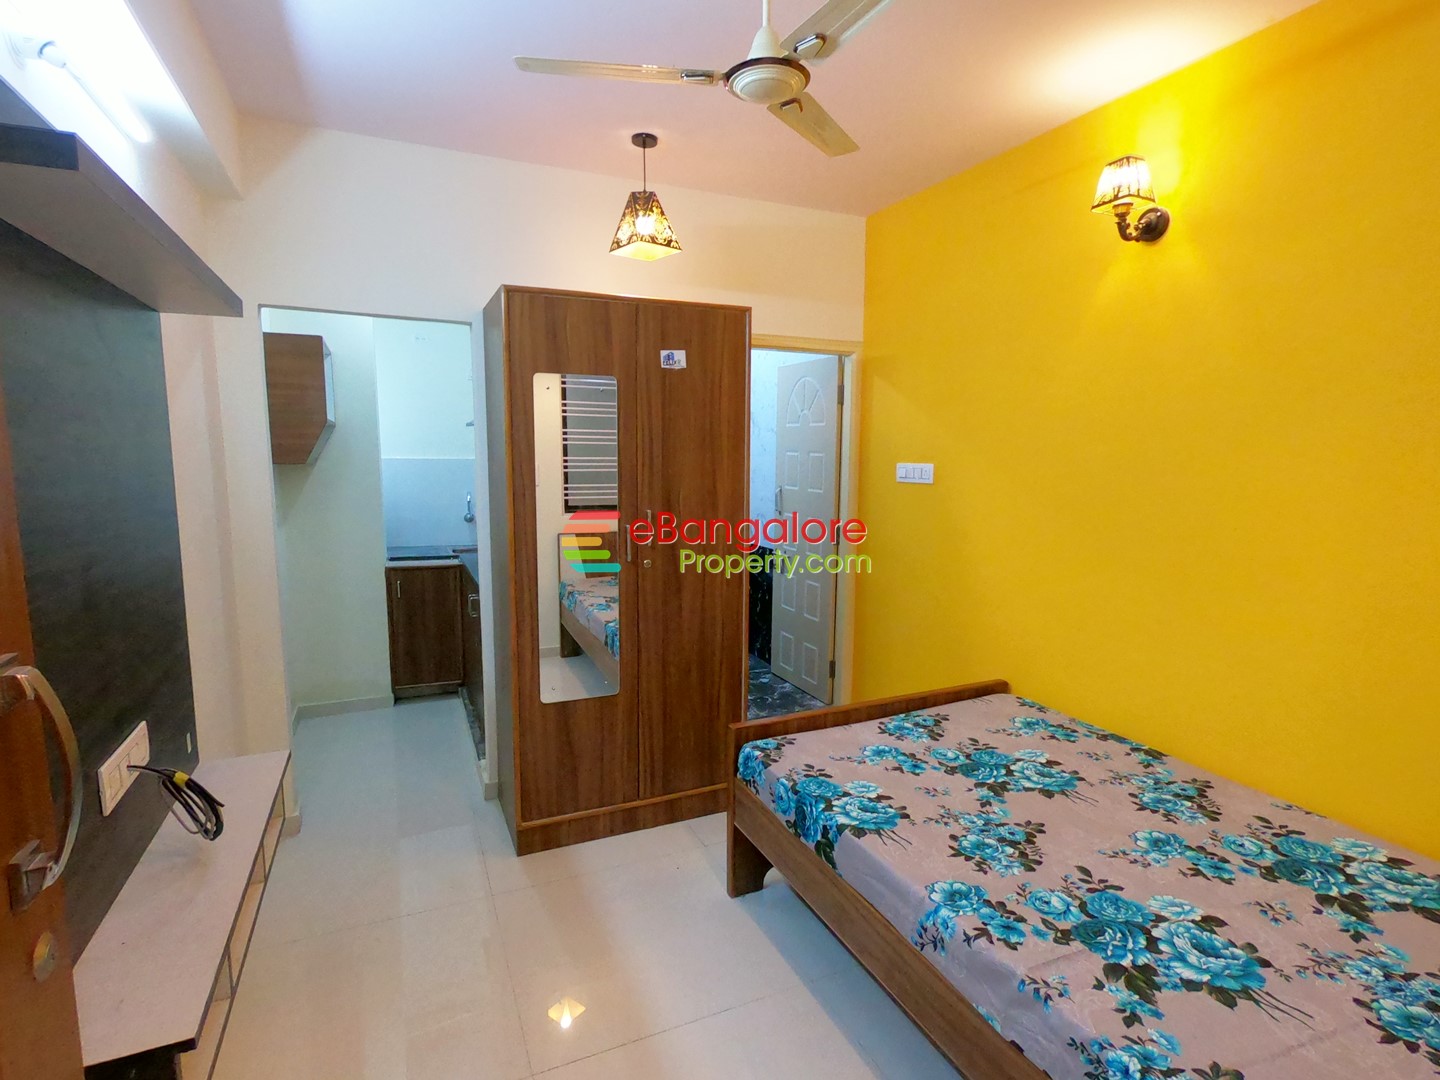 BTM Layout Silk Board – 30 Unit Rental Income Property For Sale on 40×57 – Fully Furnished